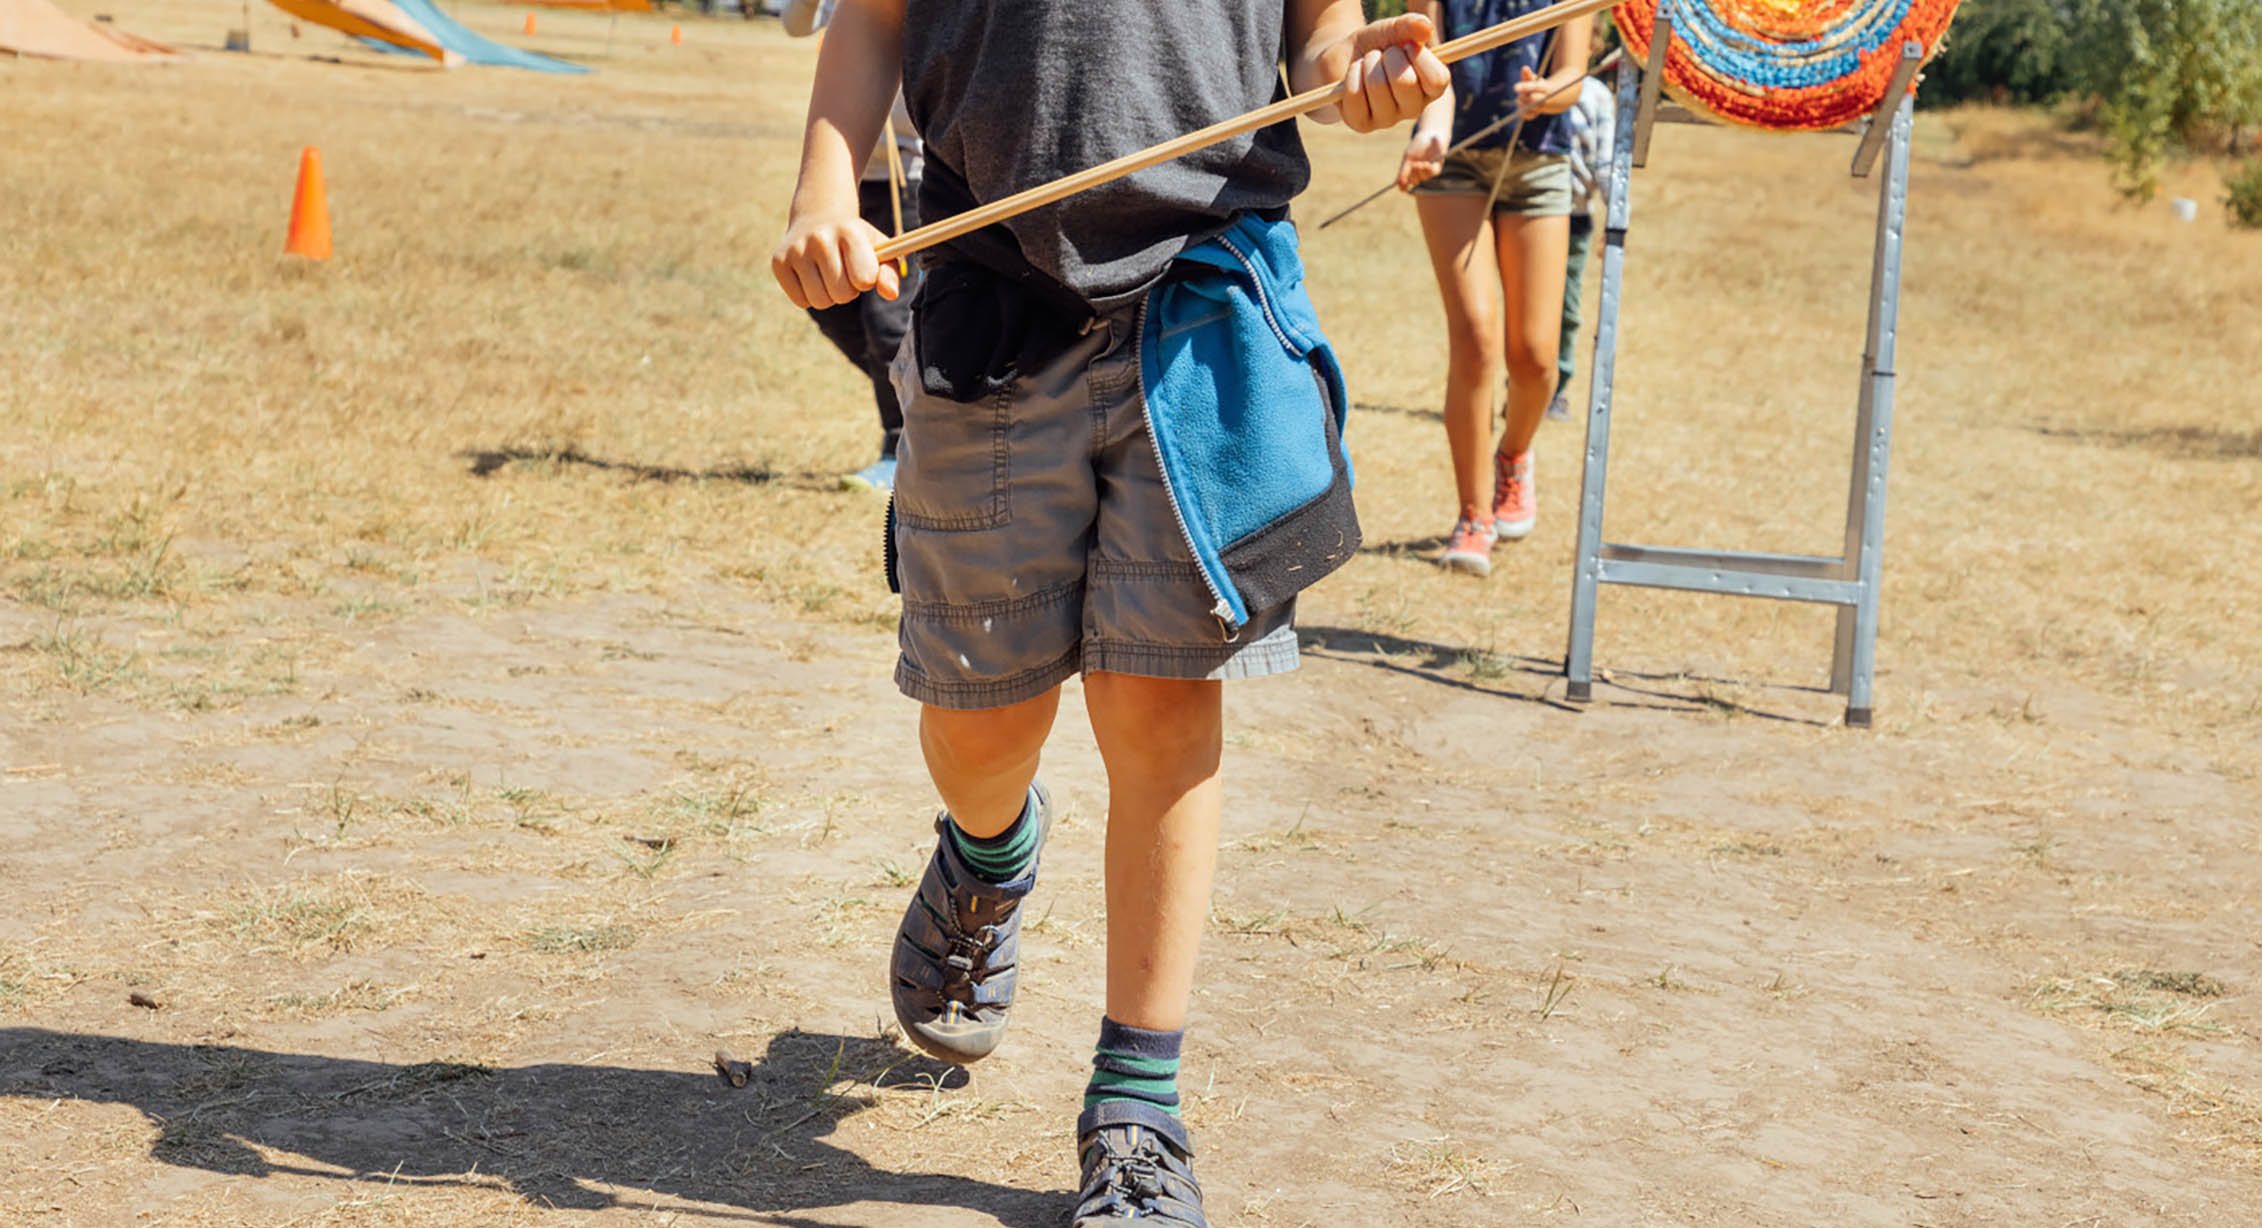 A kid doing archery at camp